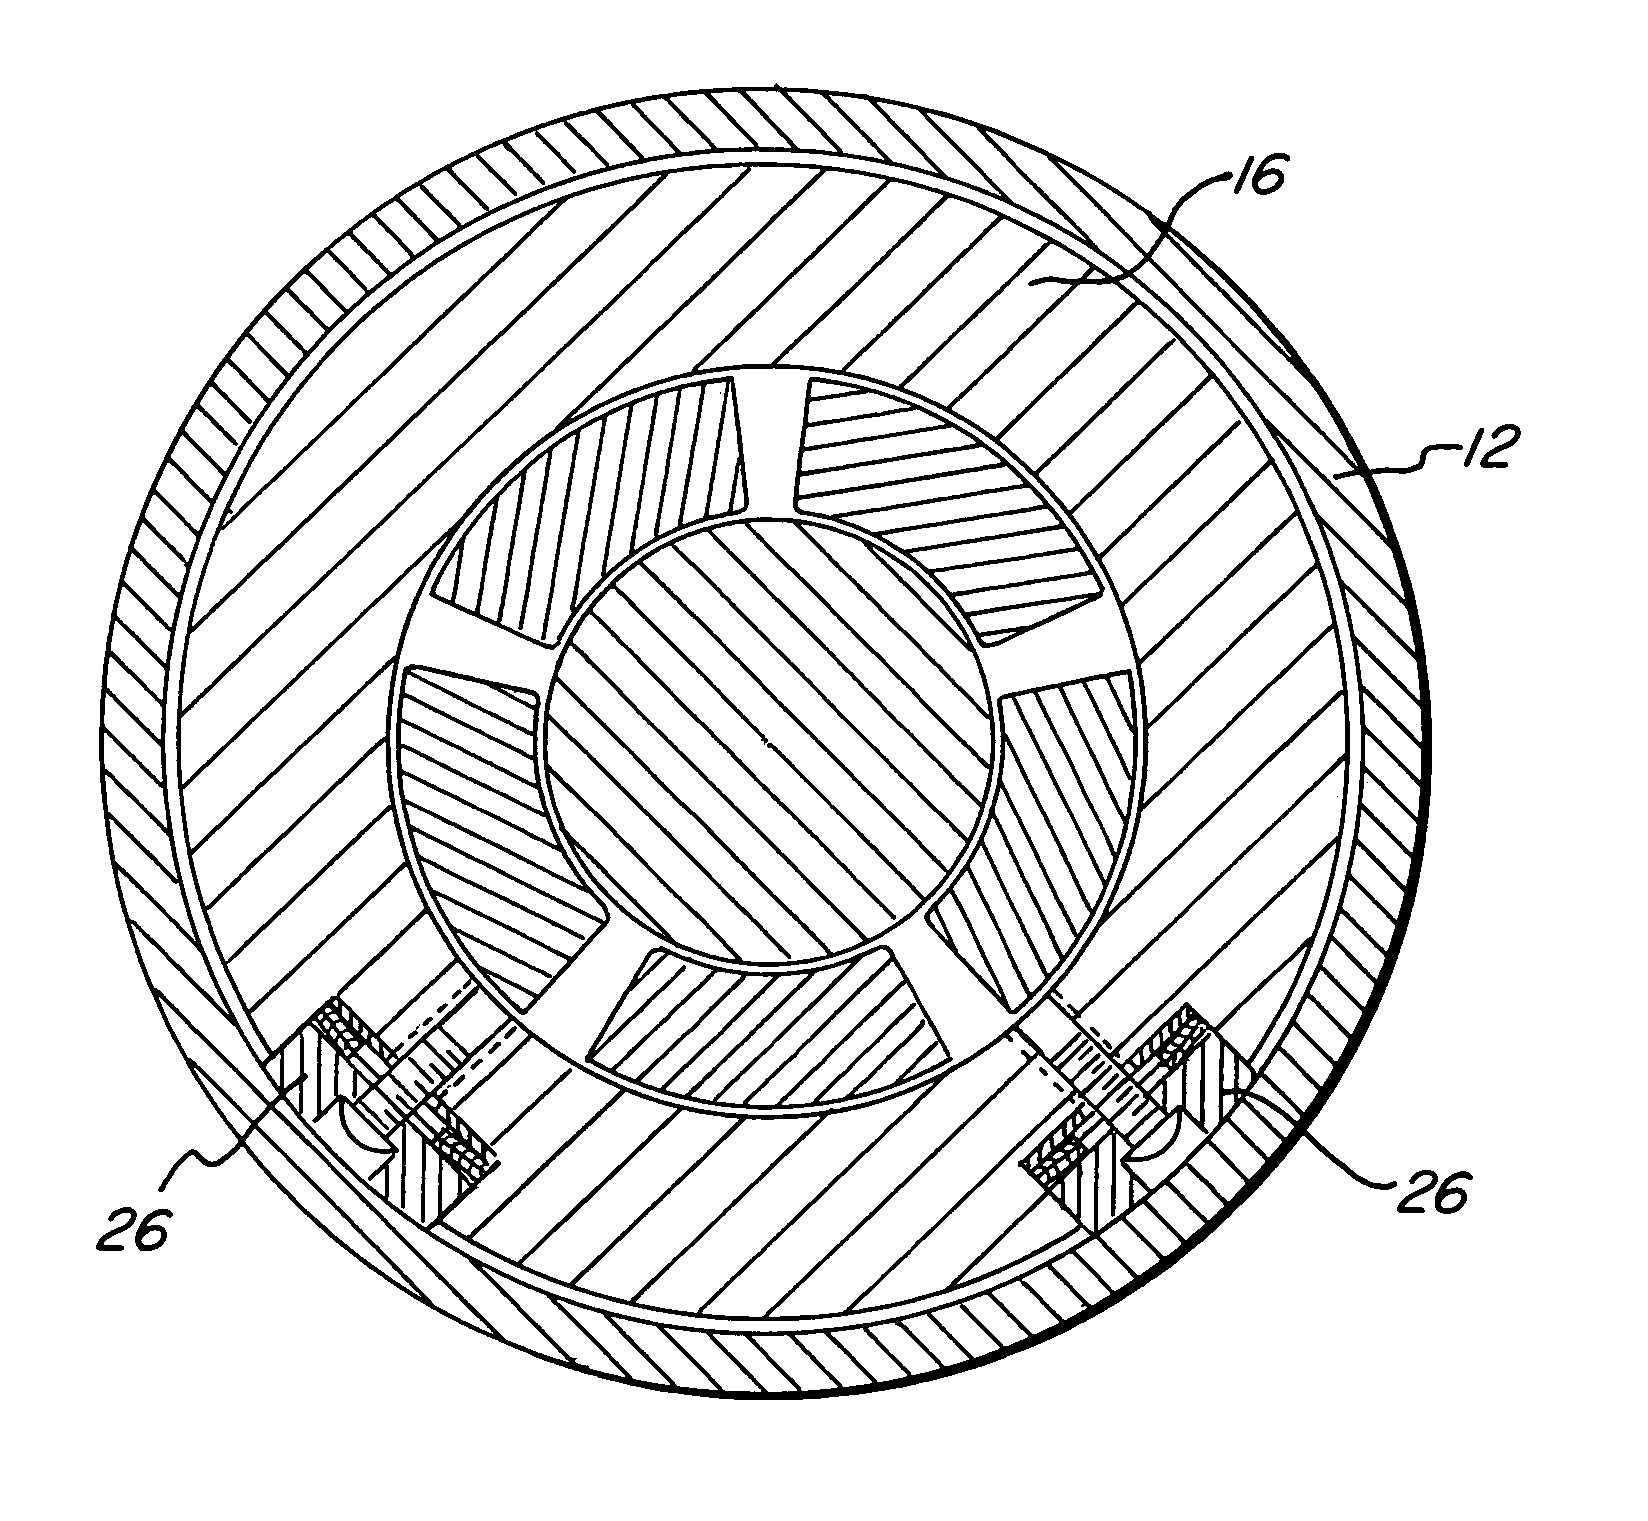 Disc spring centering device for squeeze film dampers